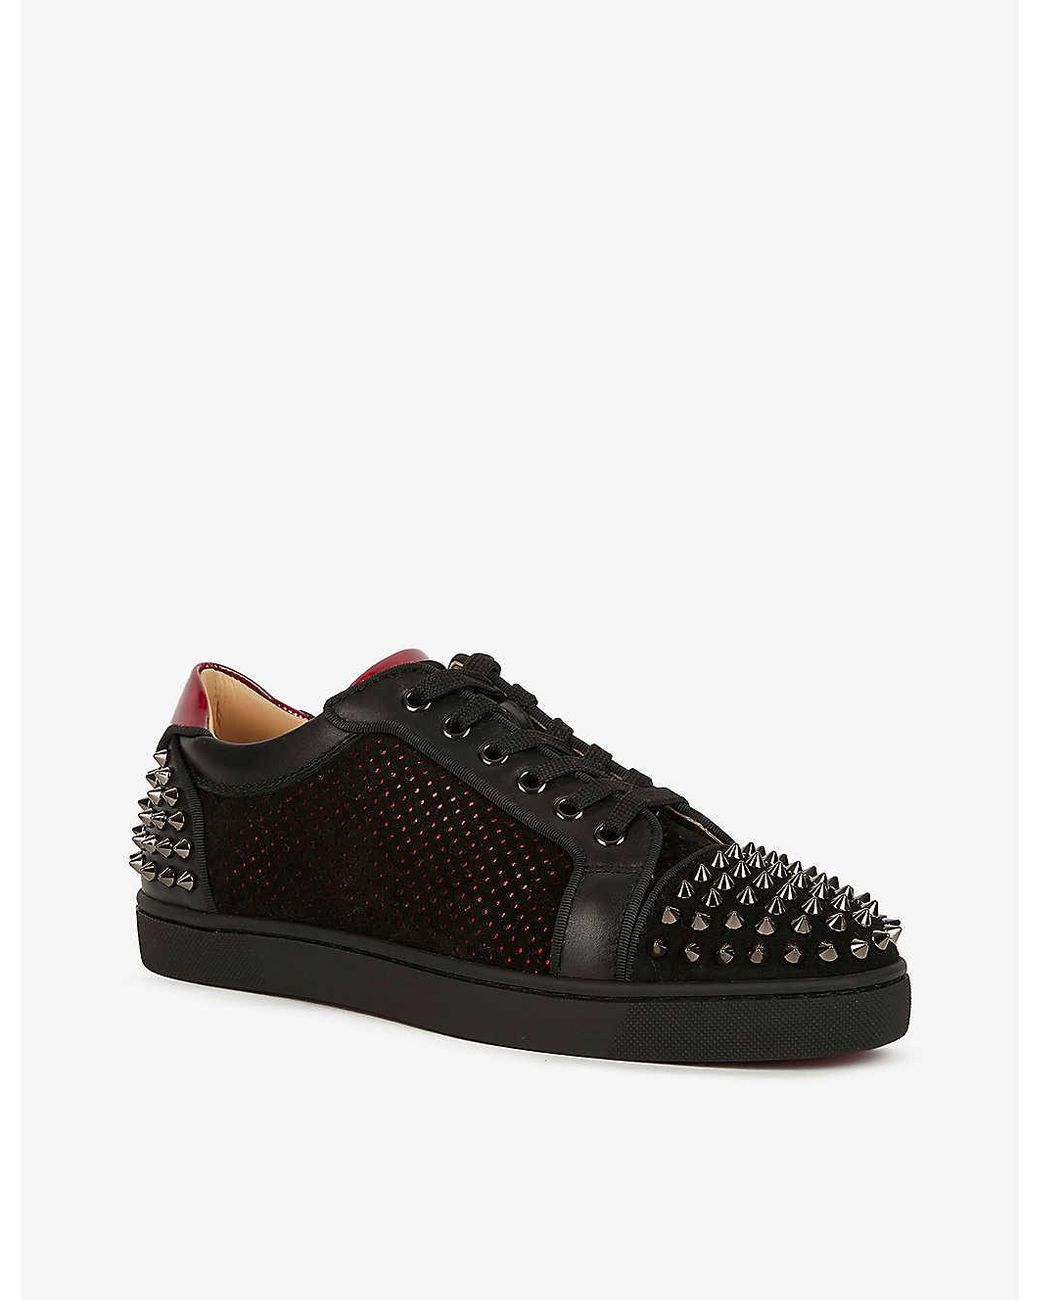 Christian Louboutin Christian Louboutin sneakers enamel Suede Black Gold  Used mens #39 1/2 ｜Product Code：2107600896335｜BRAND OFF Online Store